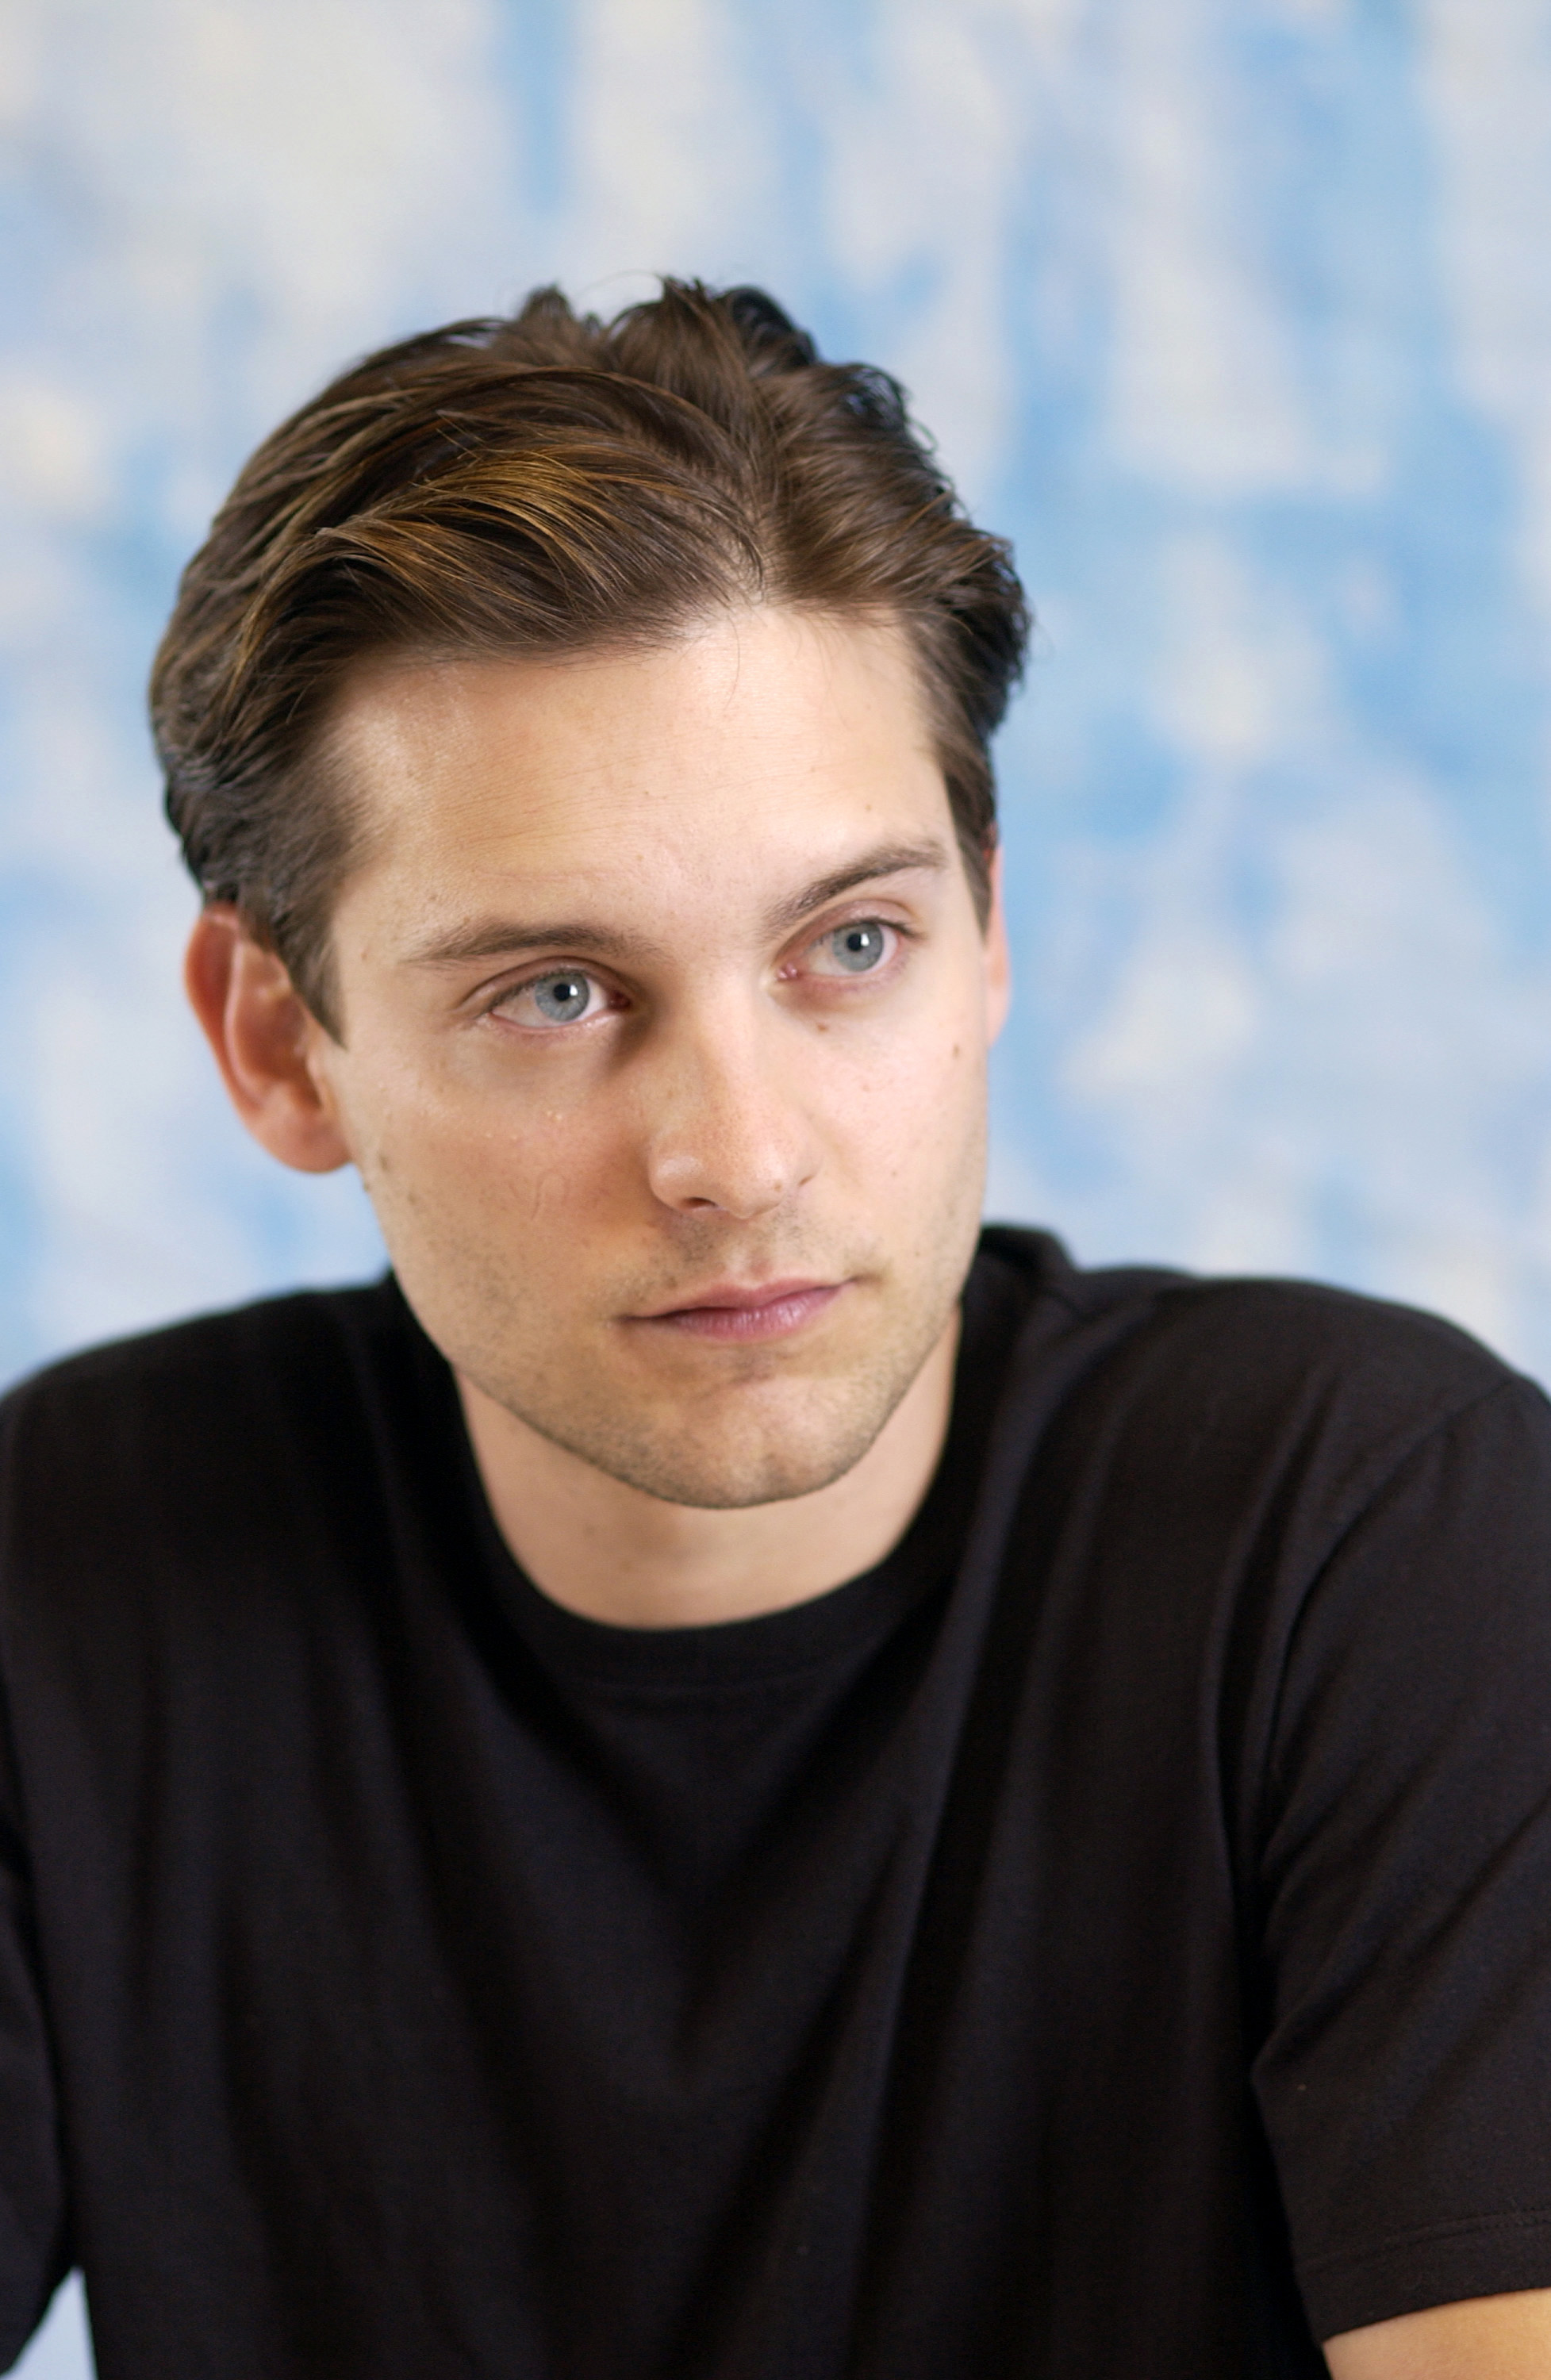 Tobey Maguire during a press conference for "Seabiscuit" on July 13, 2003, in Arcadia, California. | Source: Getty Images